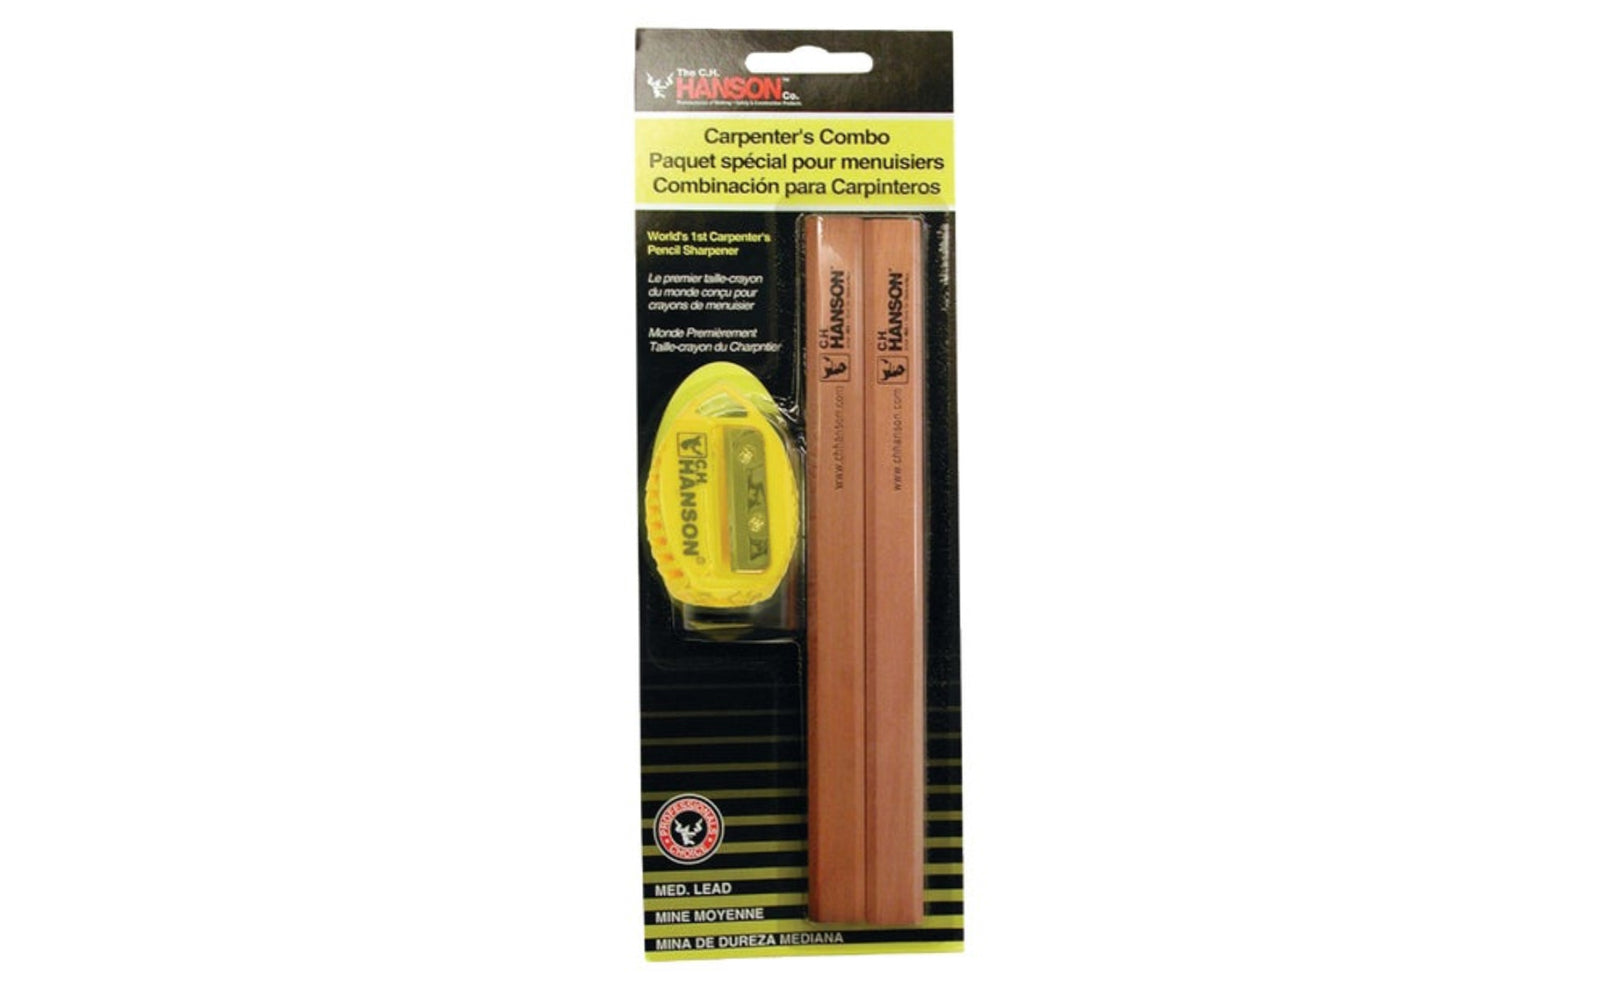 C.H. Hanson professional sharpening tool & pencils designed specifically for carpenters. Gives a clean, sharp point. Flat pencil design eliminates rolling. Safer & easier to use than a utility knife. Medium lead pencils. CH Hanson Model No. 206. 081834002064